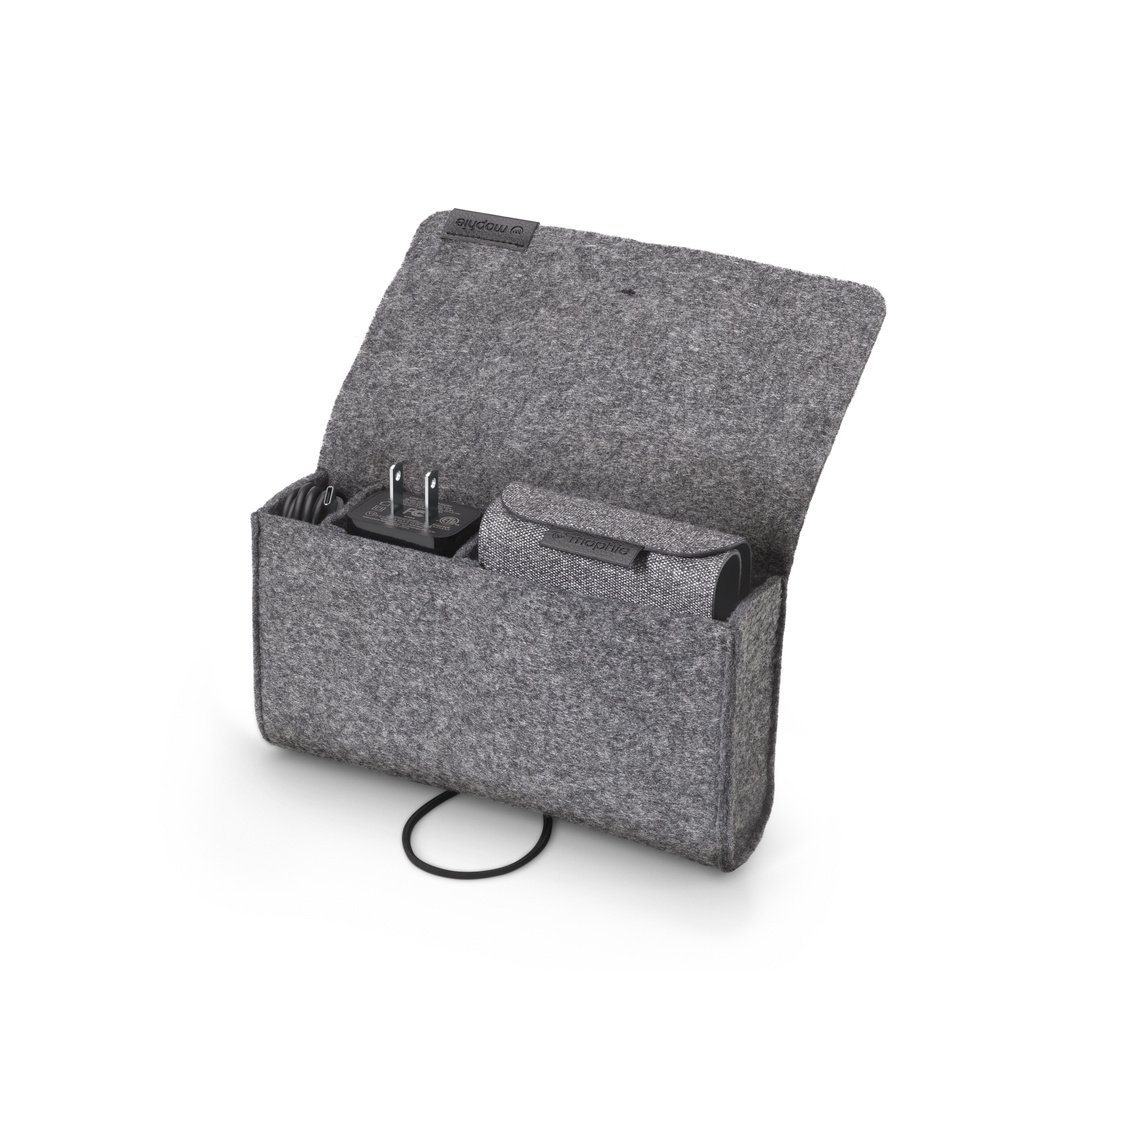 Mophie travel pouch